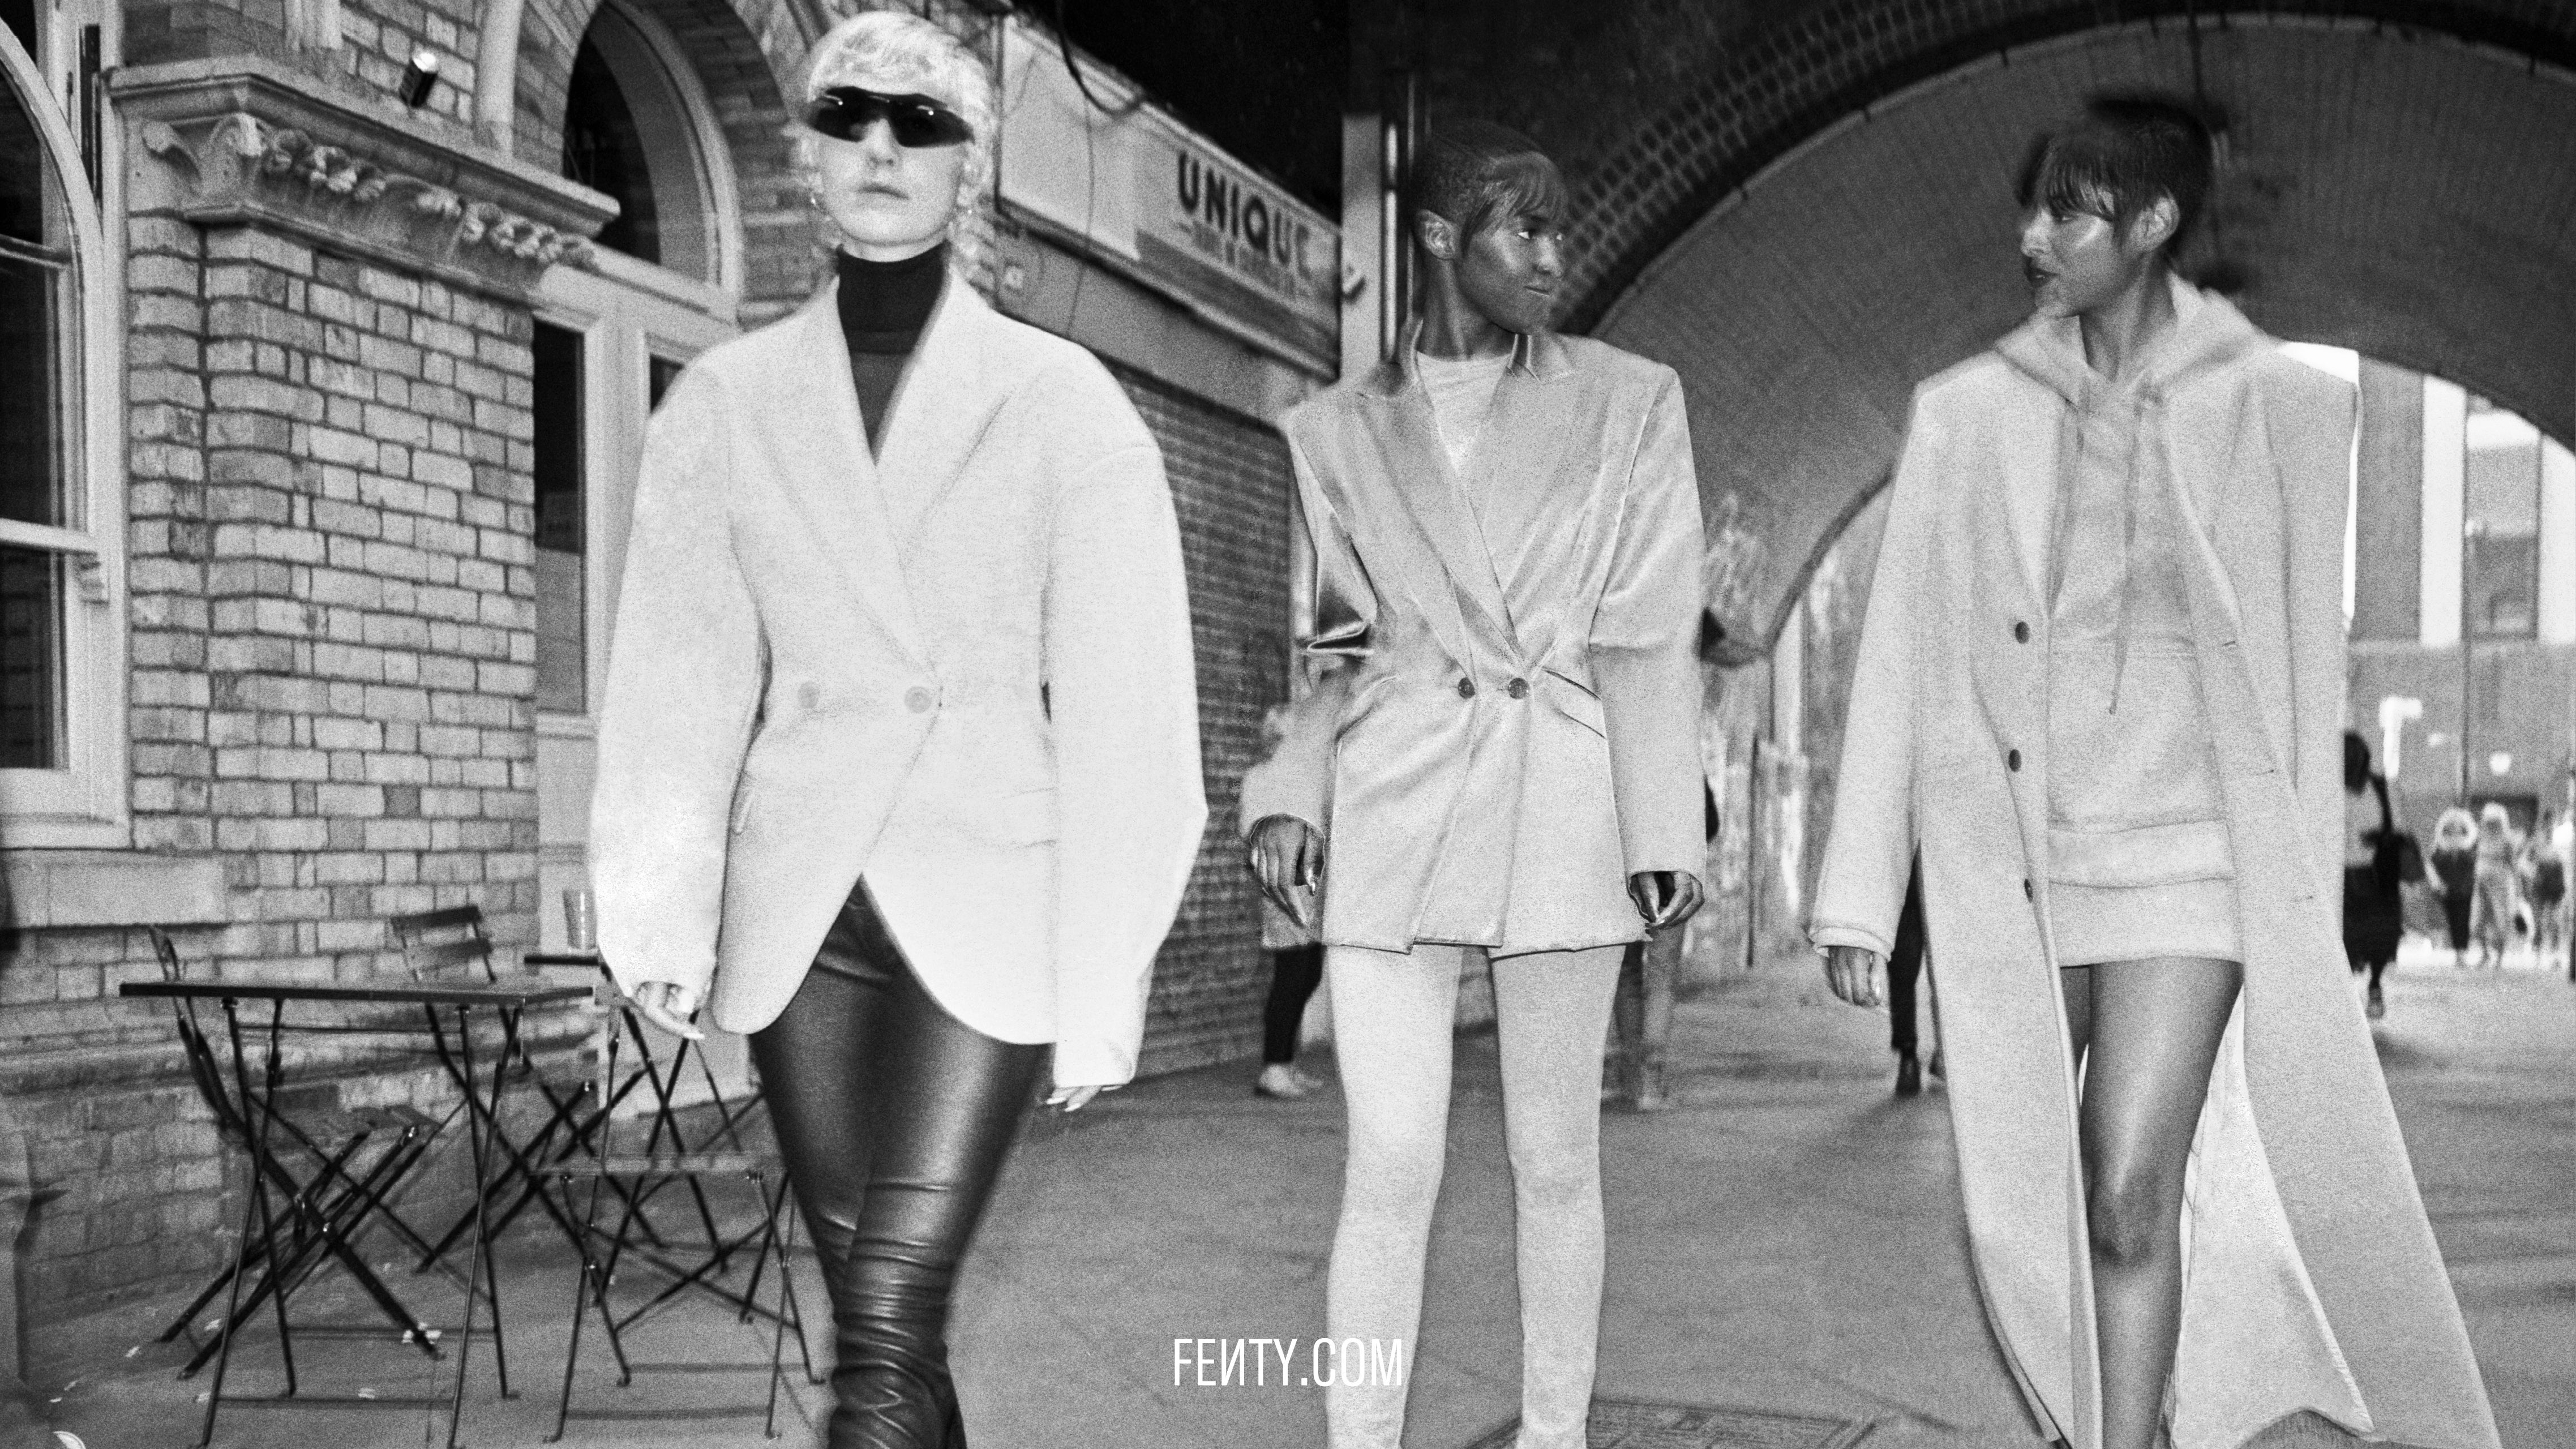 The New FENTY Campaign Depicts Black Women Perfectly